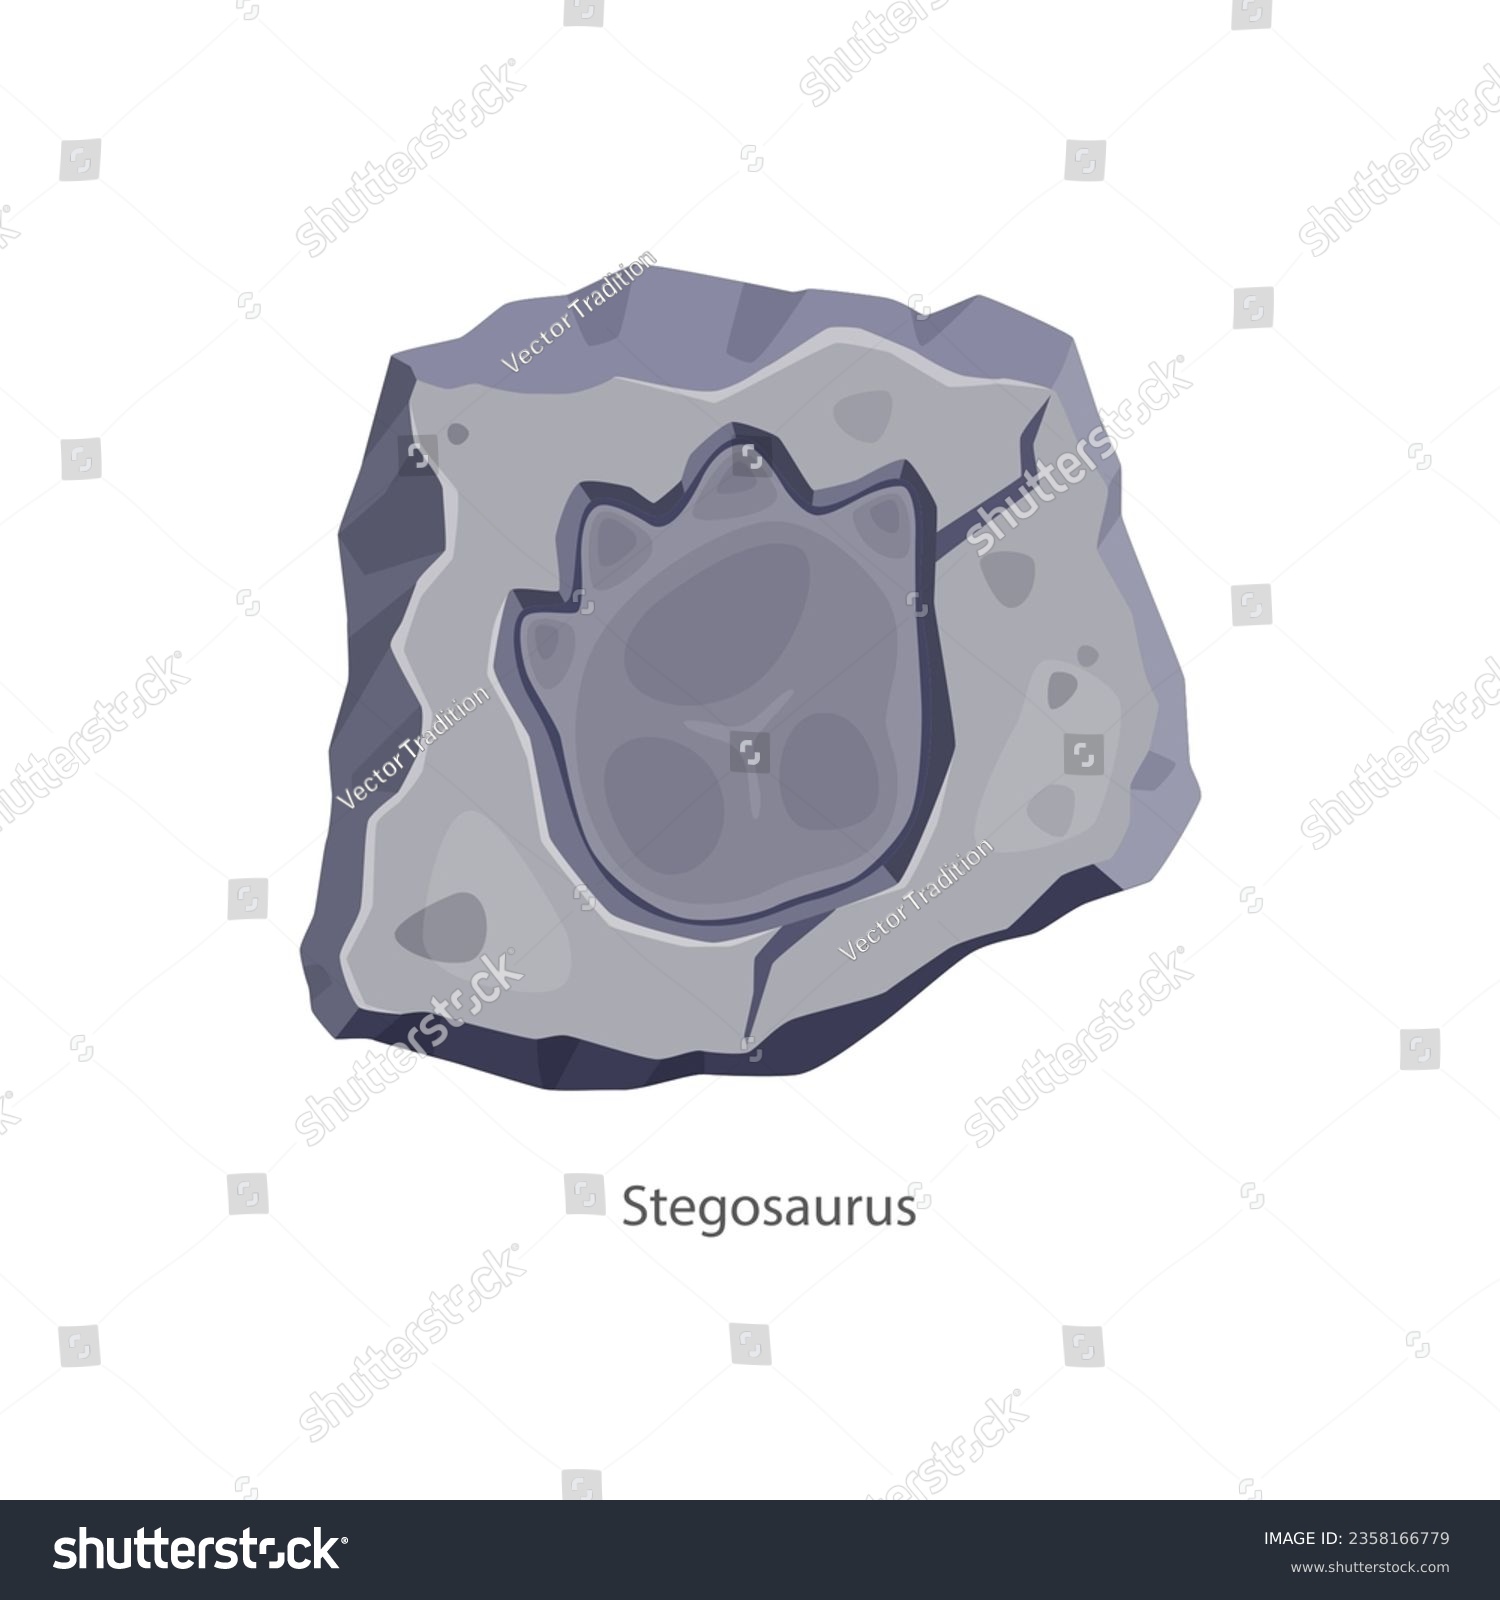 SVG of Ancient stegosaurus dinosaur footprint, archaeology fossil. Isolated vector dino animal paw print in stone piece. Reptile foot trail impression. Cartoon jurassic era archaeology and paleontology finds svg